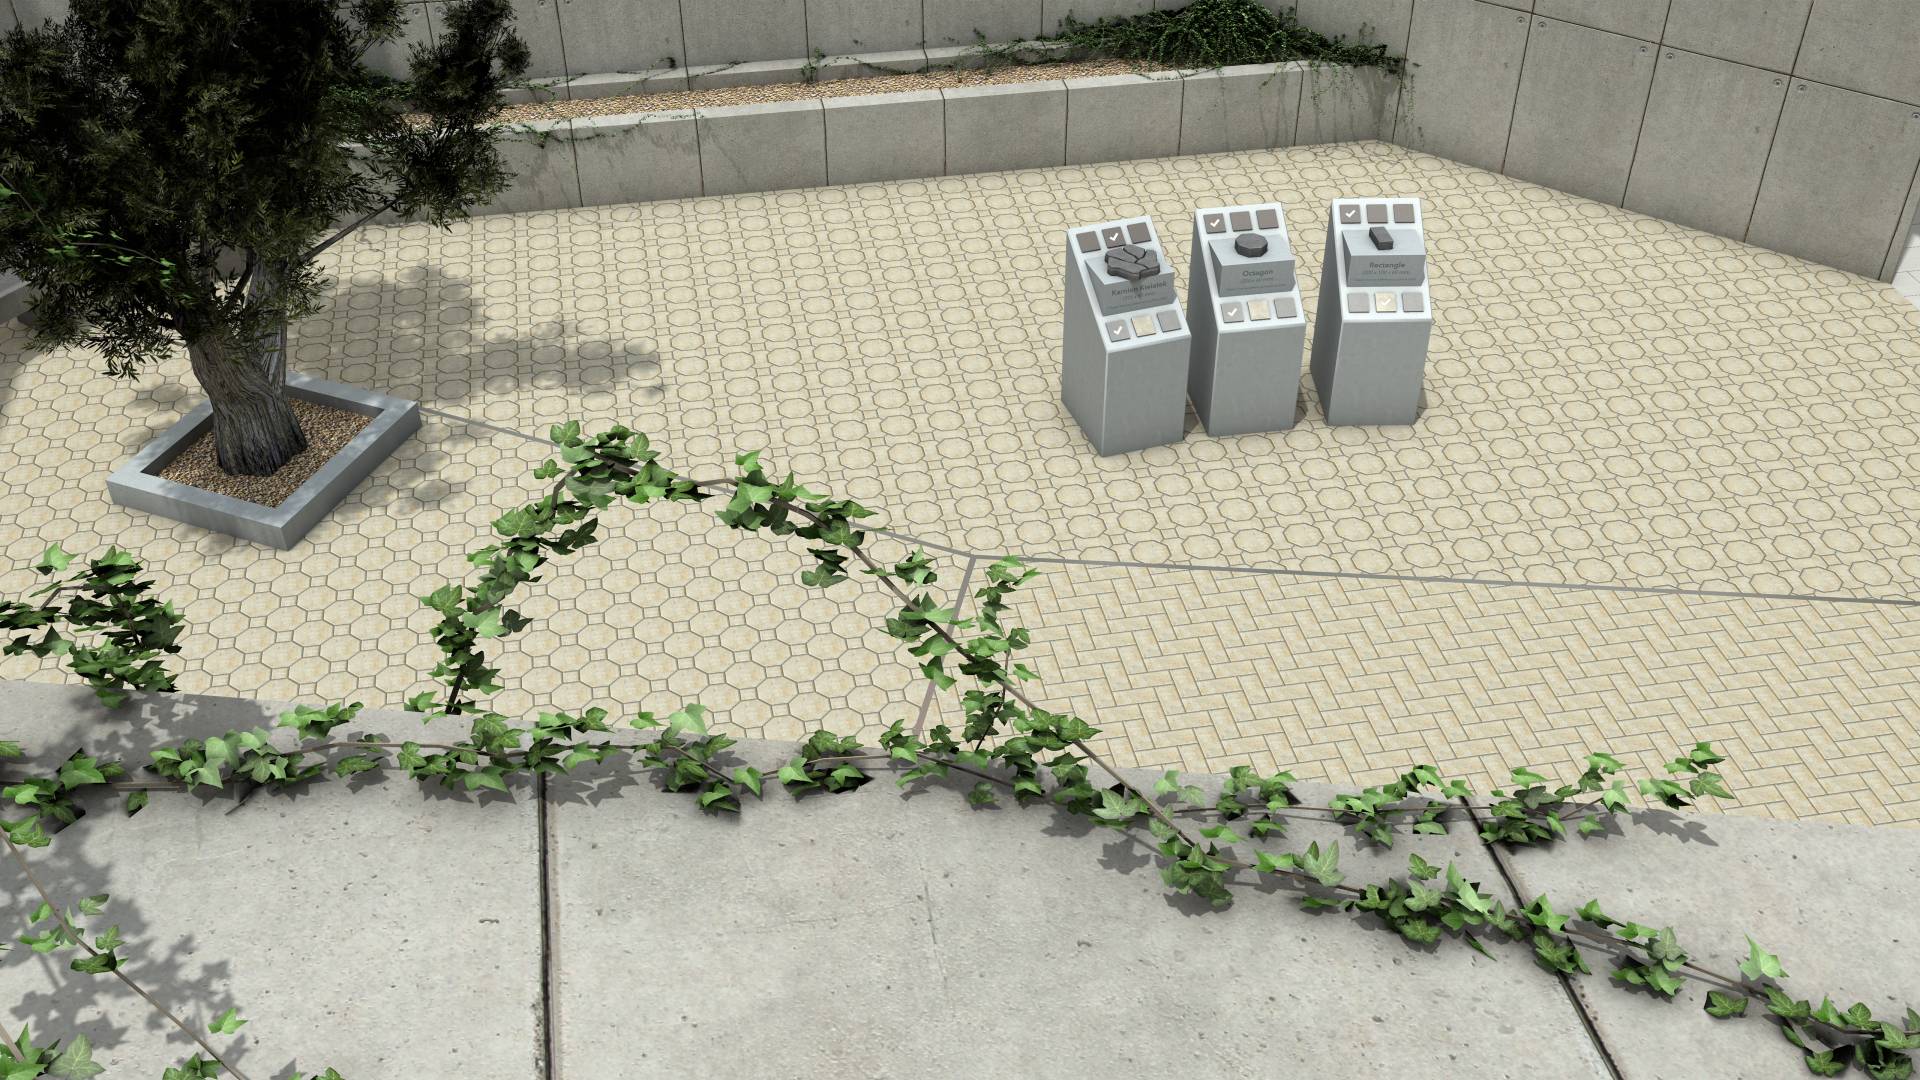 Aerial view of the virtual model garden